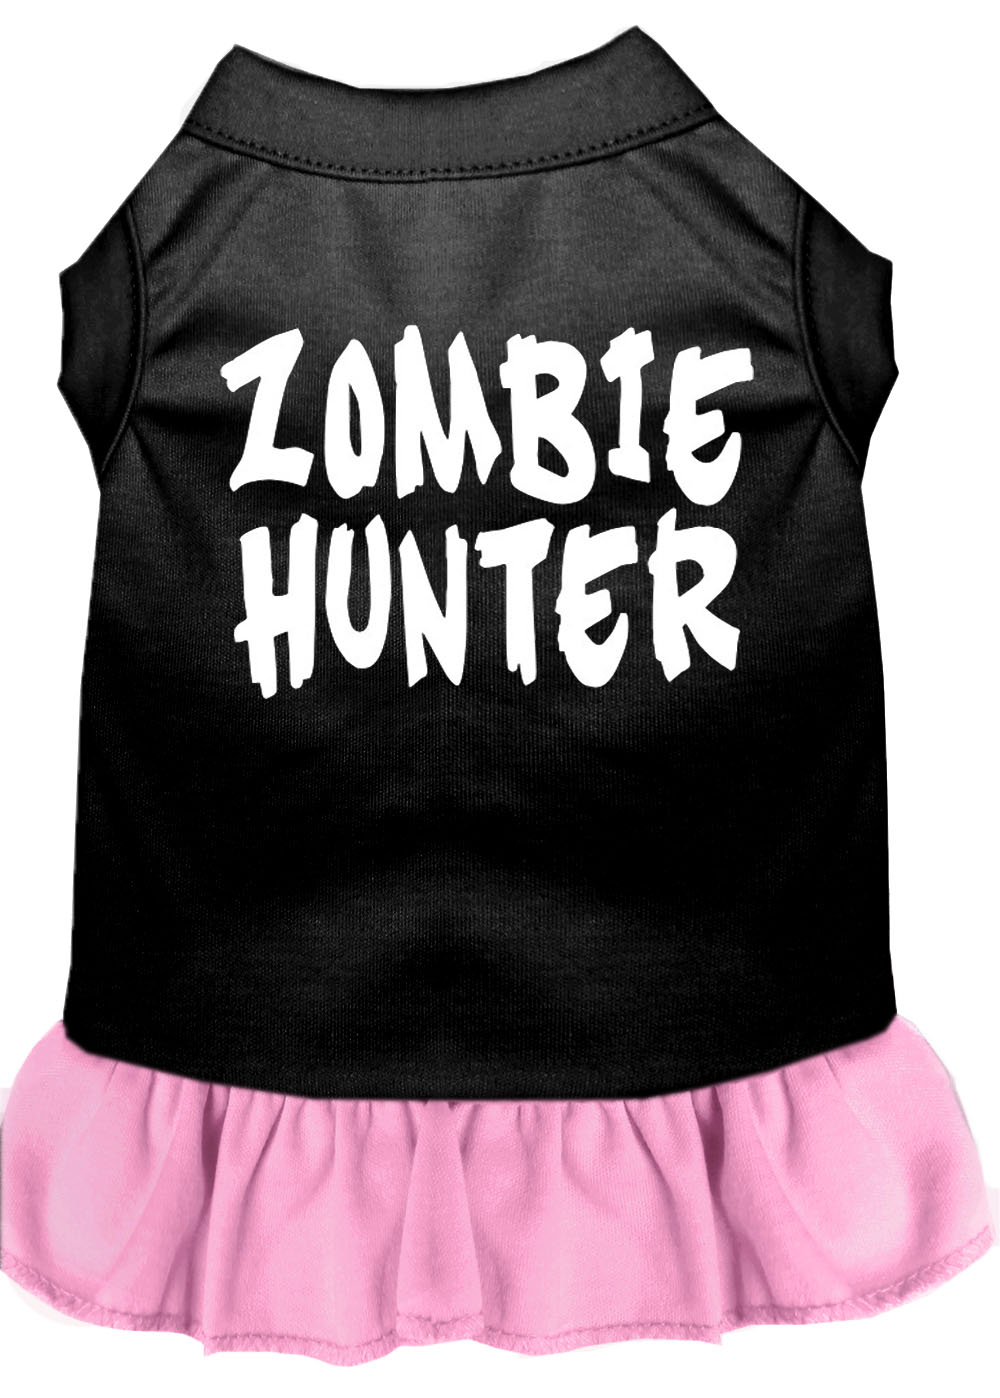 Zombie Hunter Screen Print Dress Black with Light Pink Med